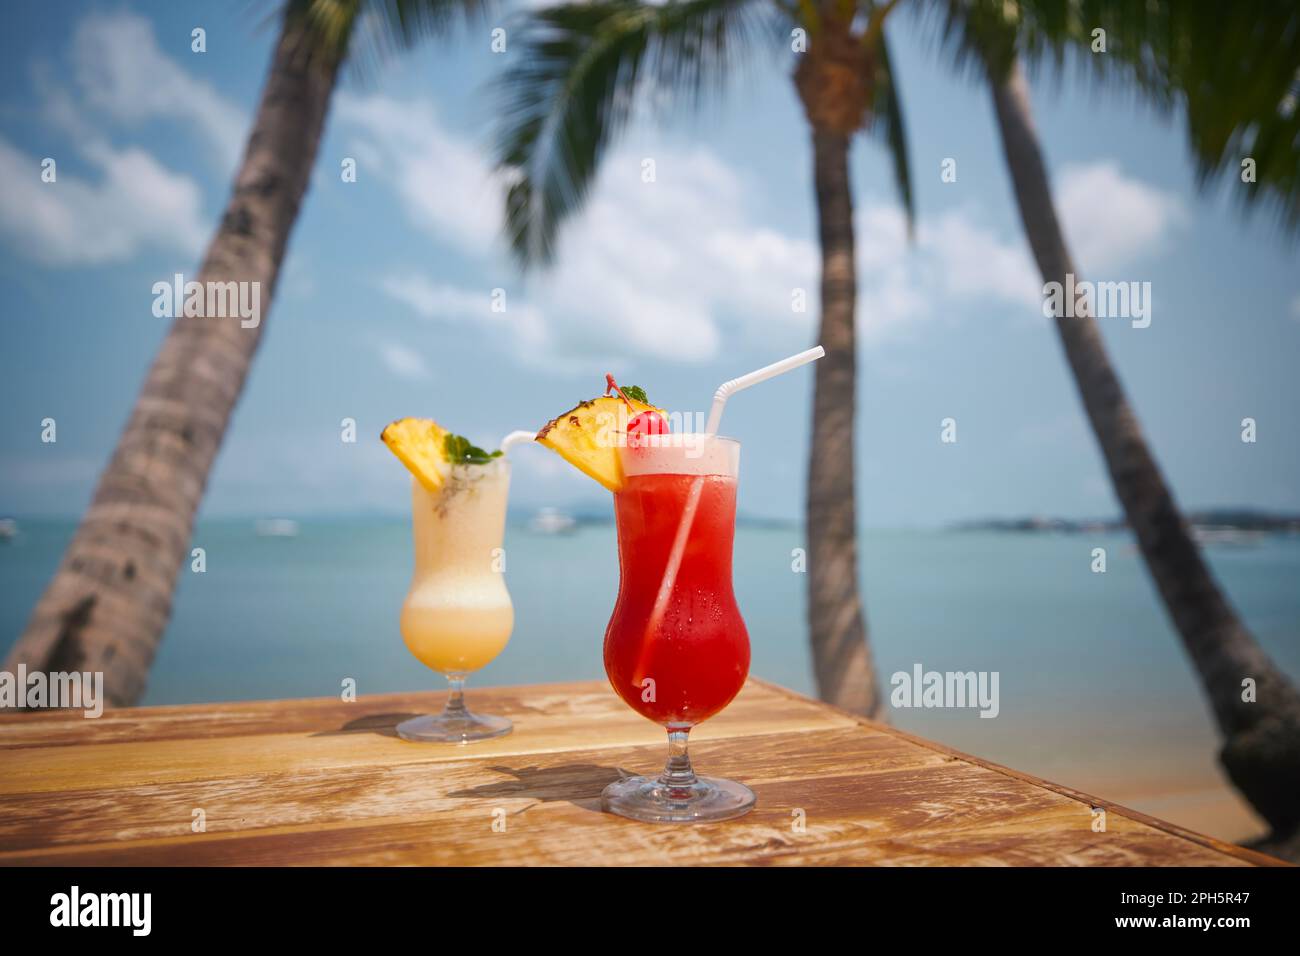 Two cocktails under palm trees on beautiful beach. Singapore Sling and Pina Colada drinks on wooden table. Stock Photo